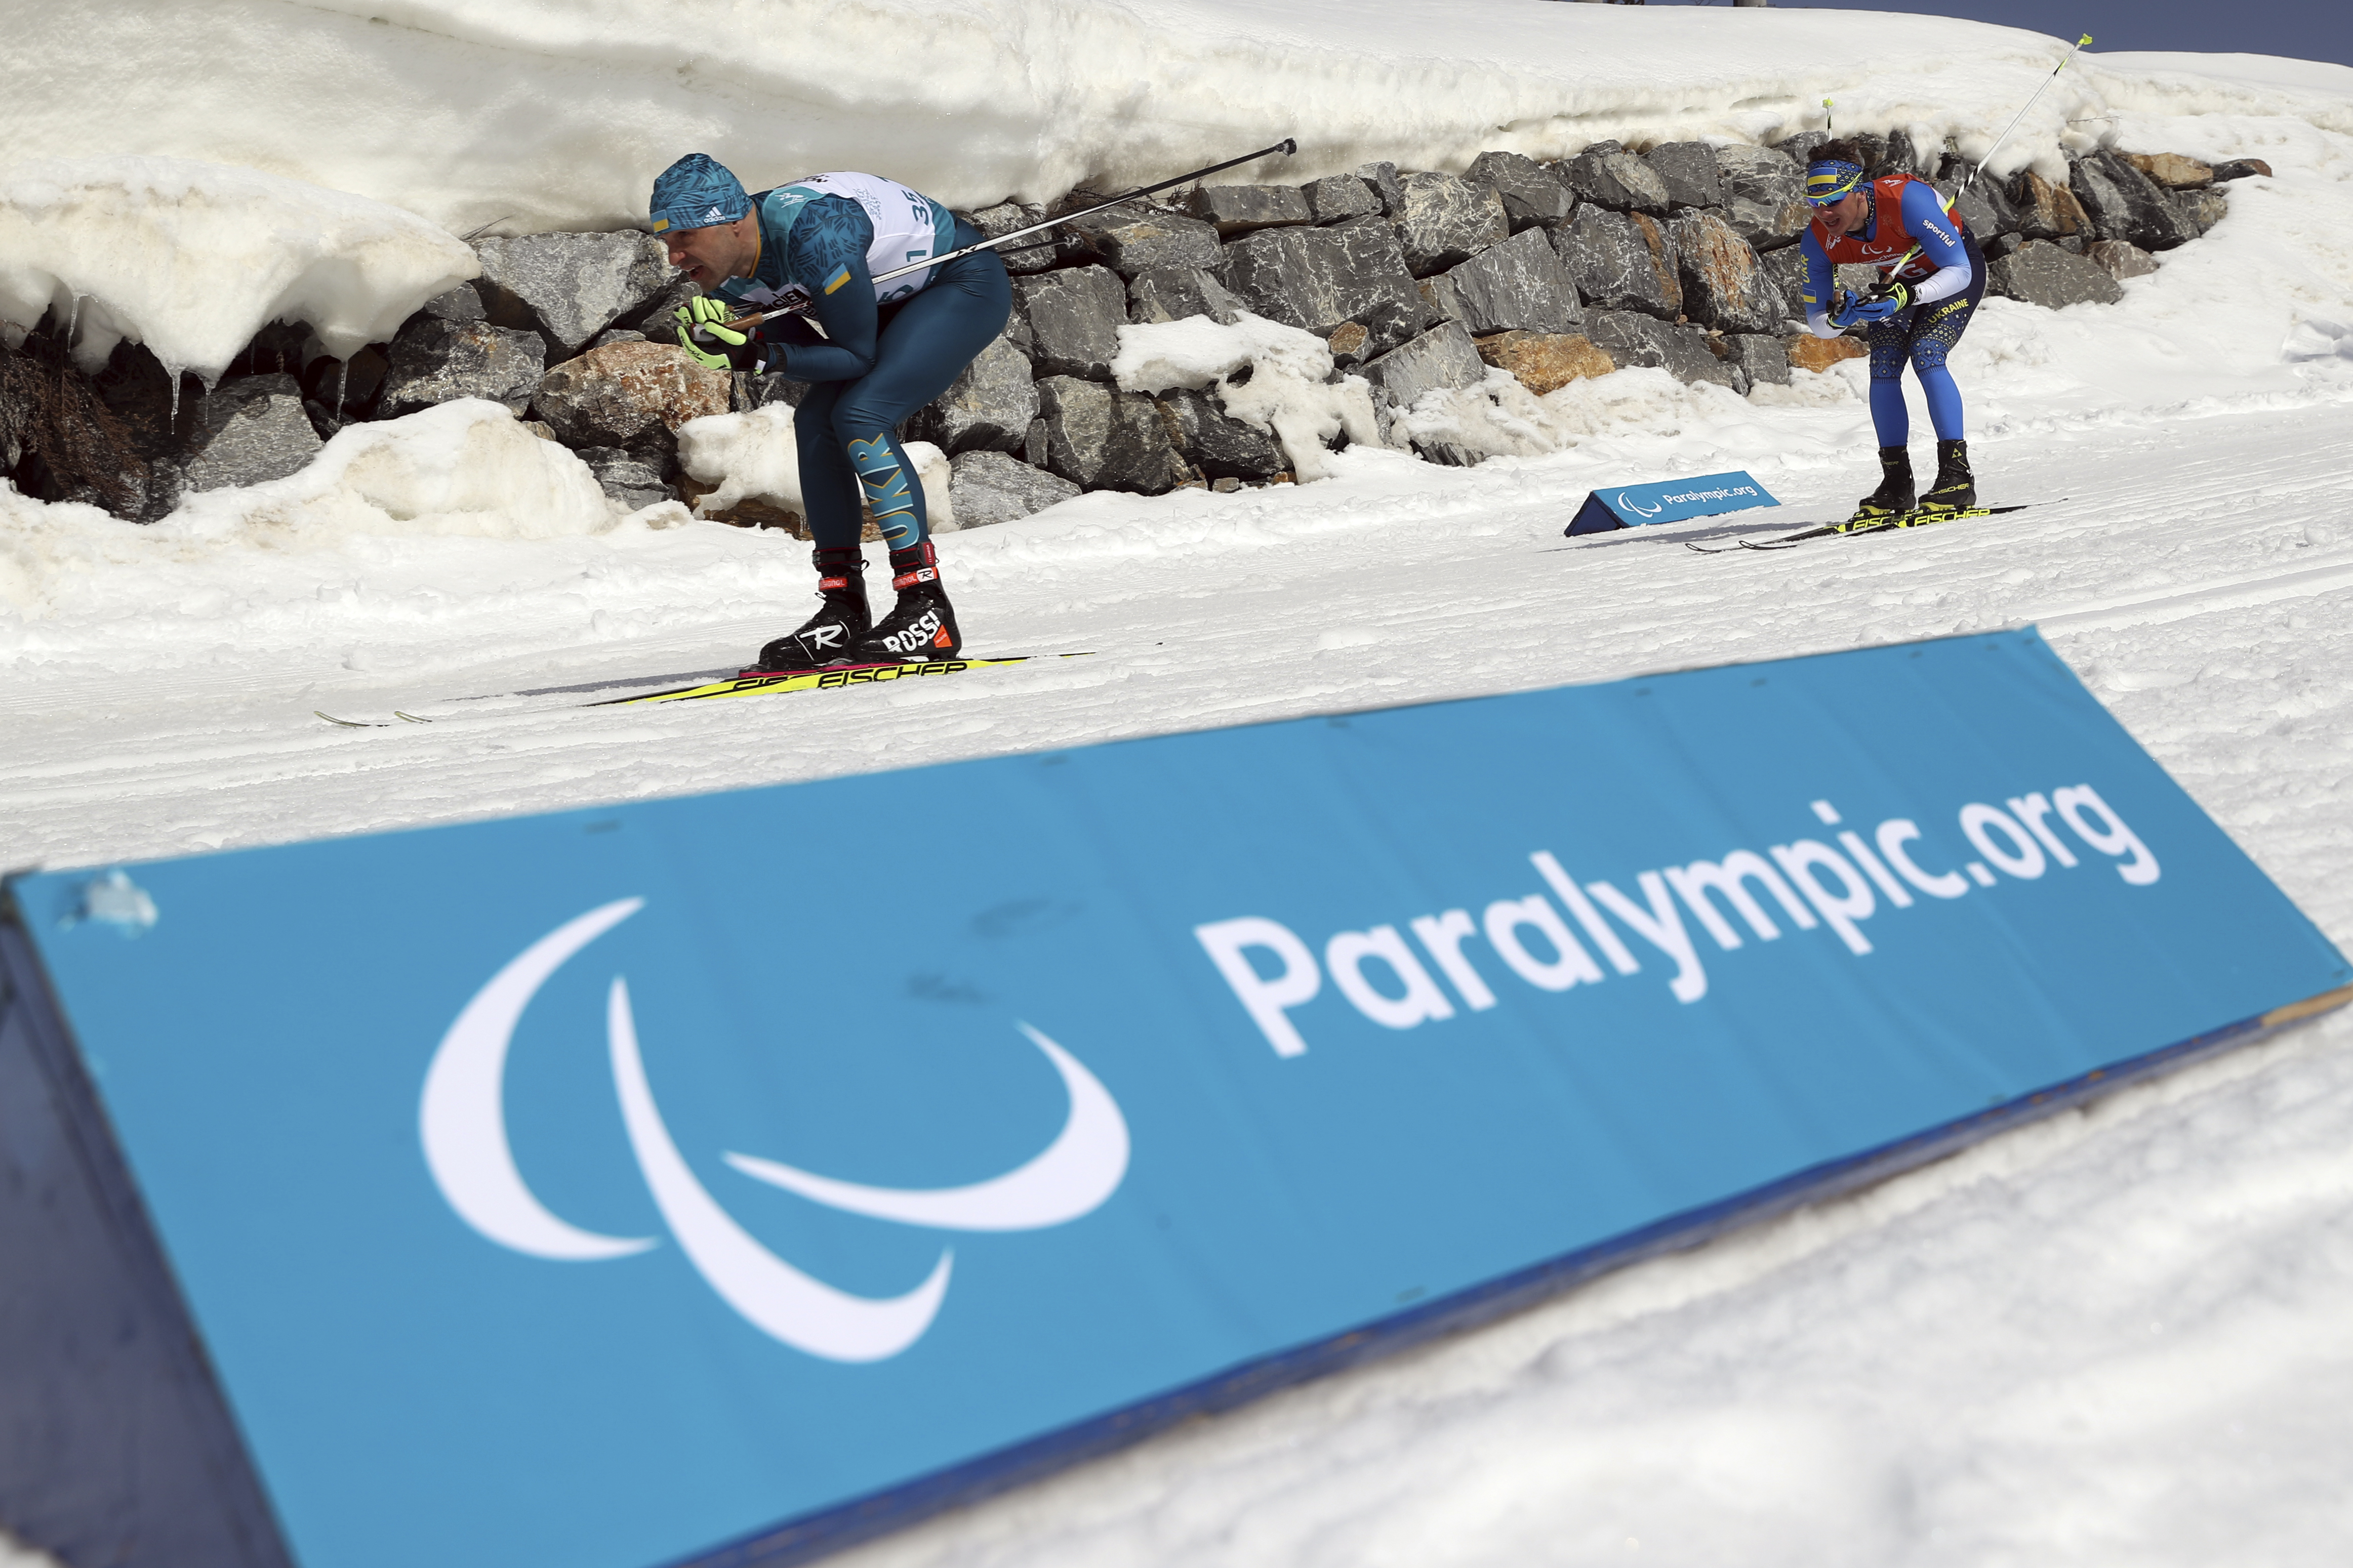 Vitaliy Luk'yanenko skis ahead of his guide Ivan Marchyshak as they compete in the Biathlon Visually Impaired Men's 7.5km at the Alpensia Biathlon Centre during the 2018 Winter Paralympics in Pyeongchang, South Korea, Saturday, March 10, 2018. (AP Photo/Ng Han Guan)